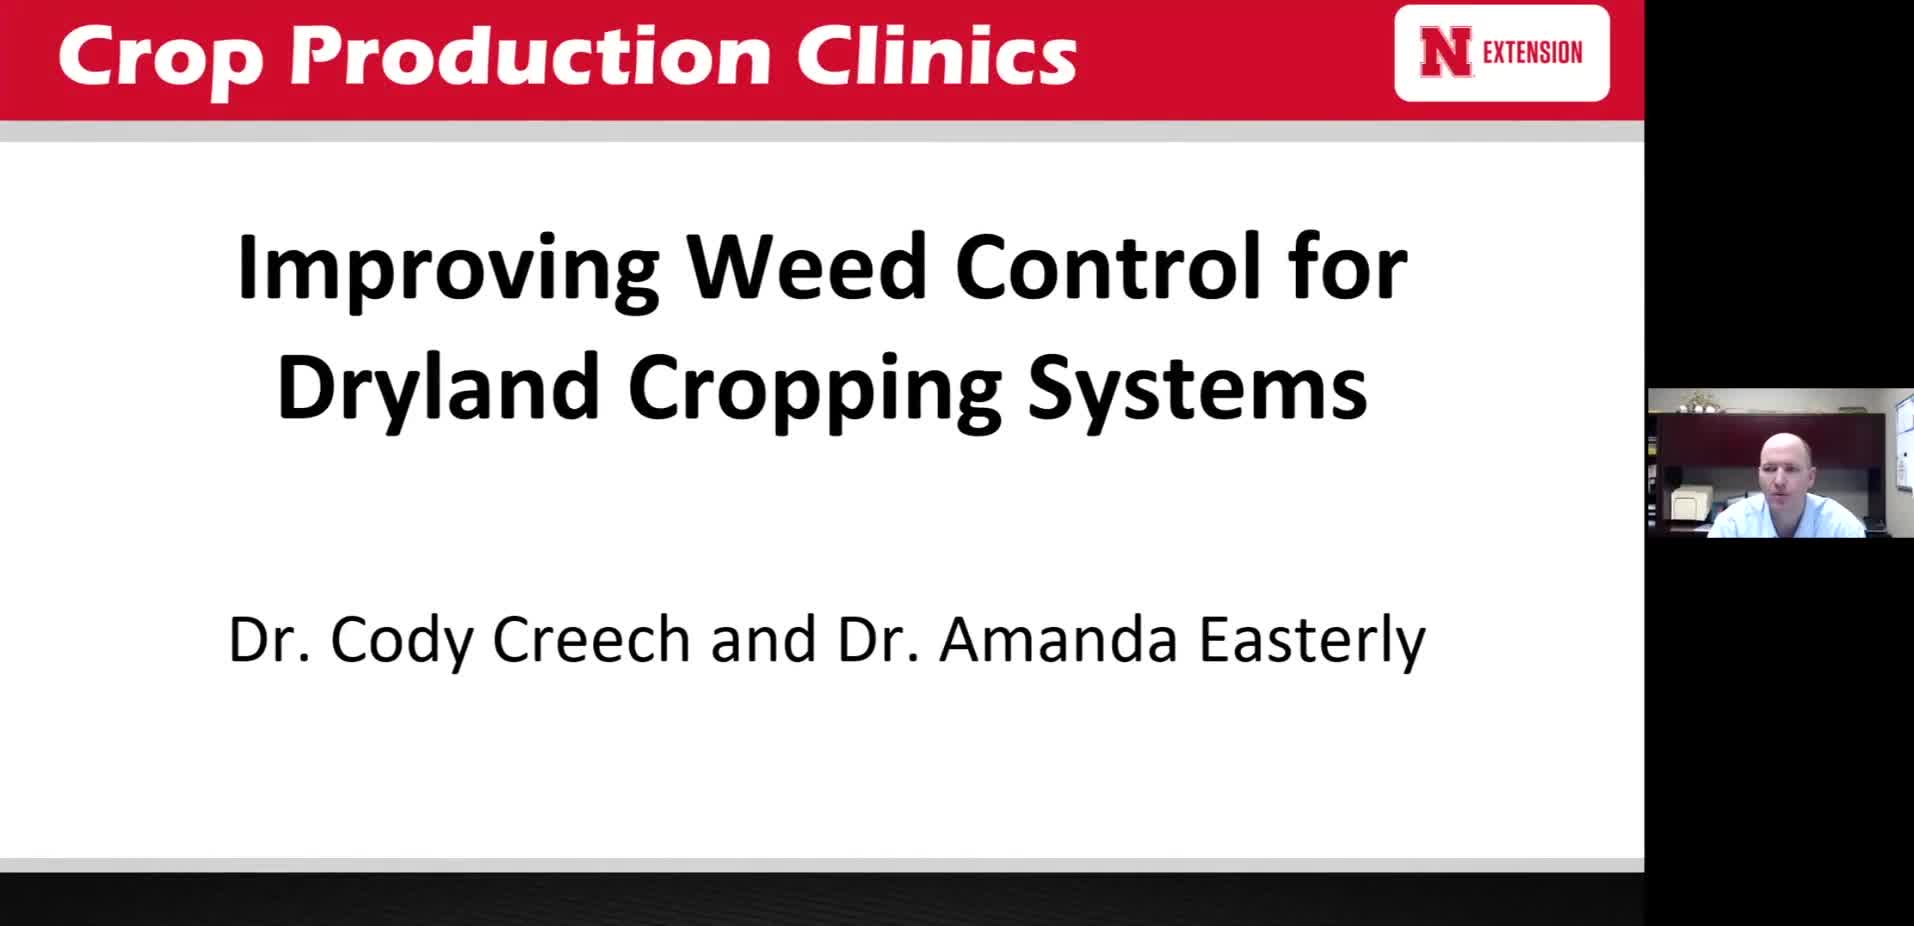 Improving Weed Control for Dryland Cropping Systems